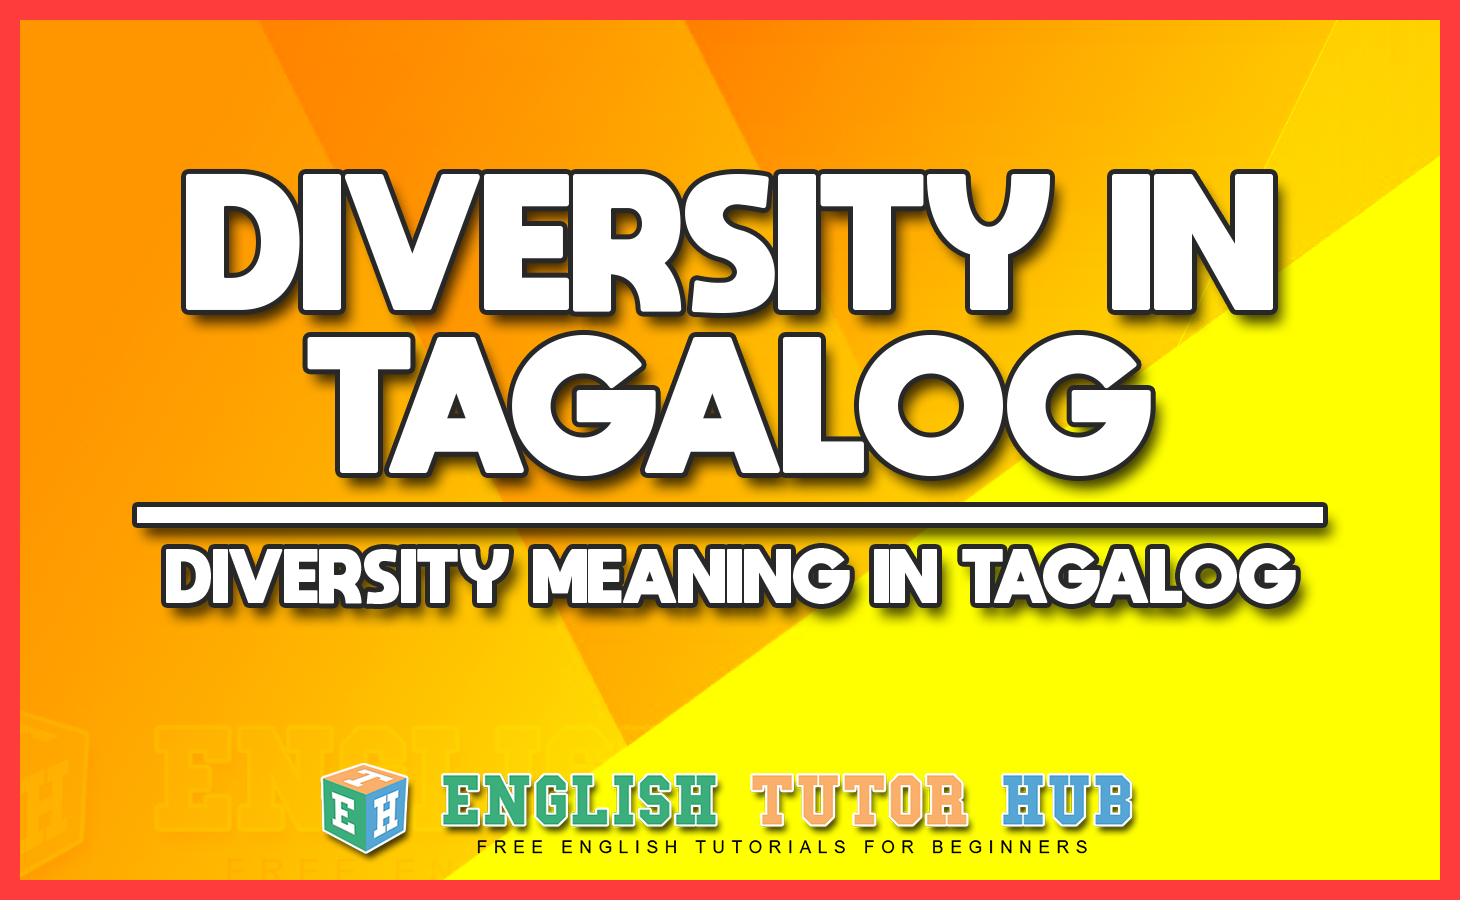 Diversity in Tagalog - Diversity Meaning in Tagalog